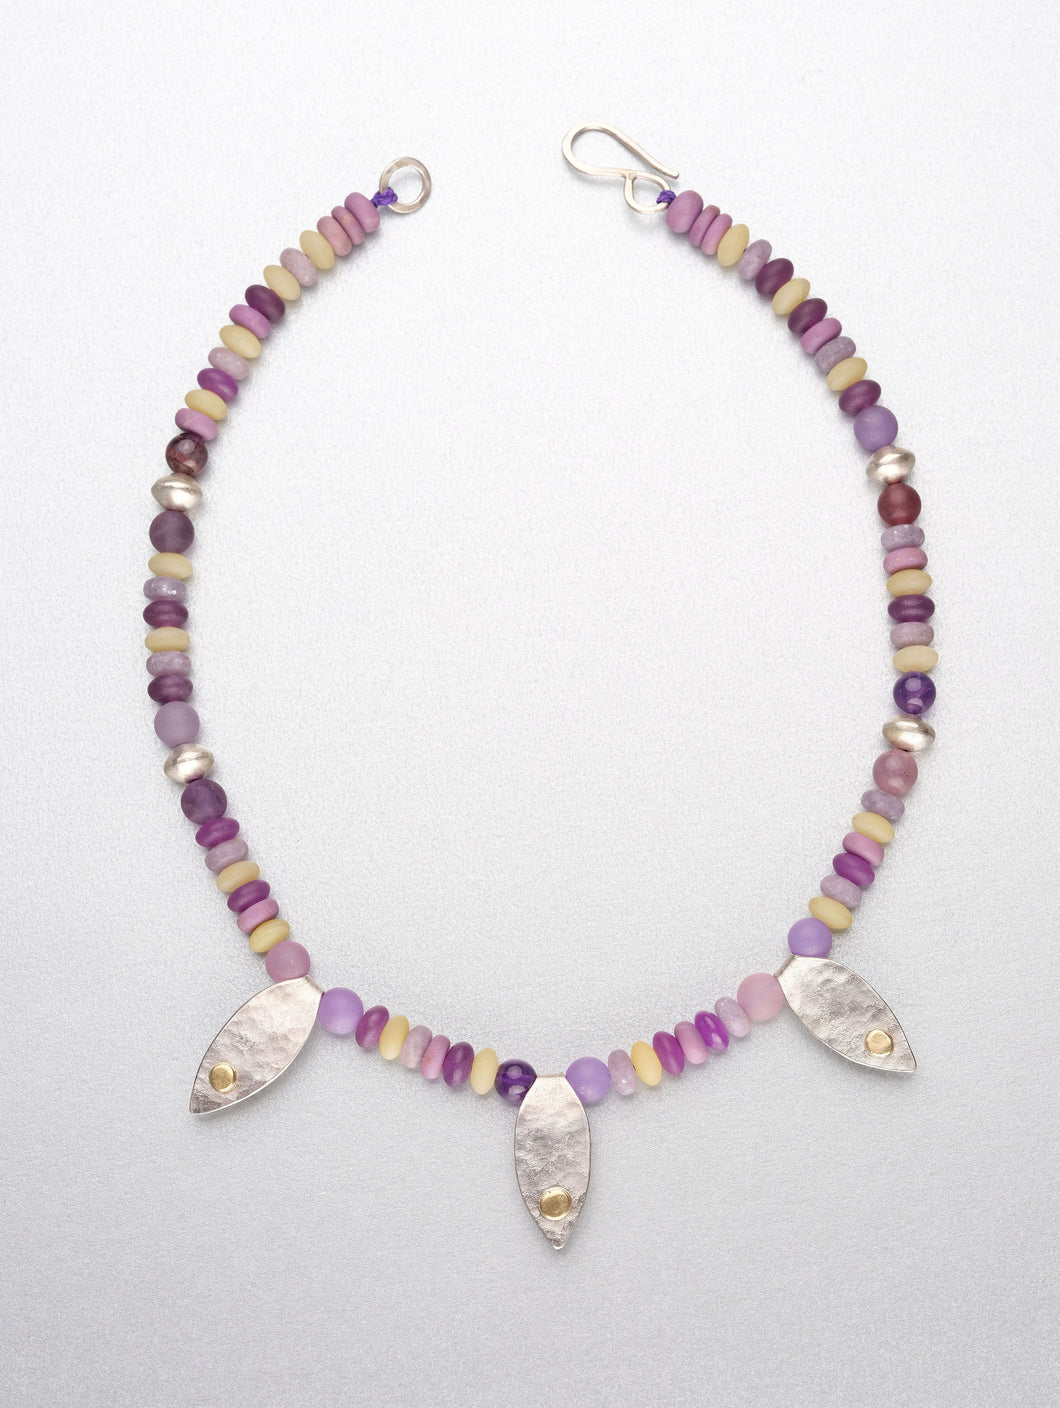 Beaded necklace with leaf pendants and 18ct gold accents